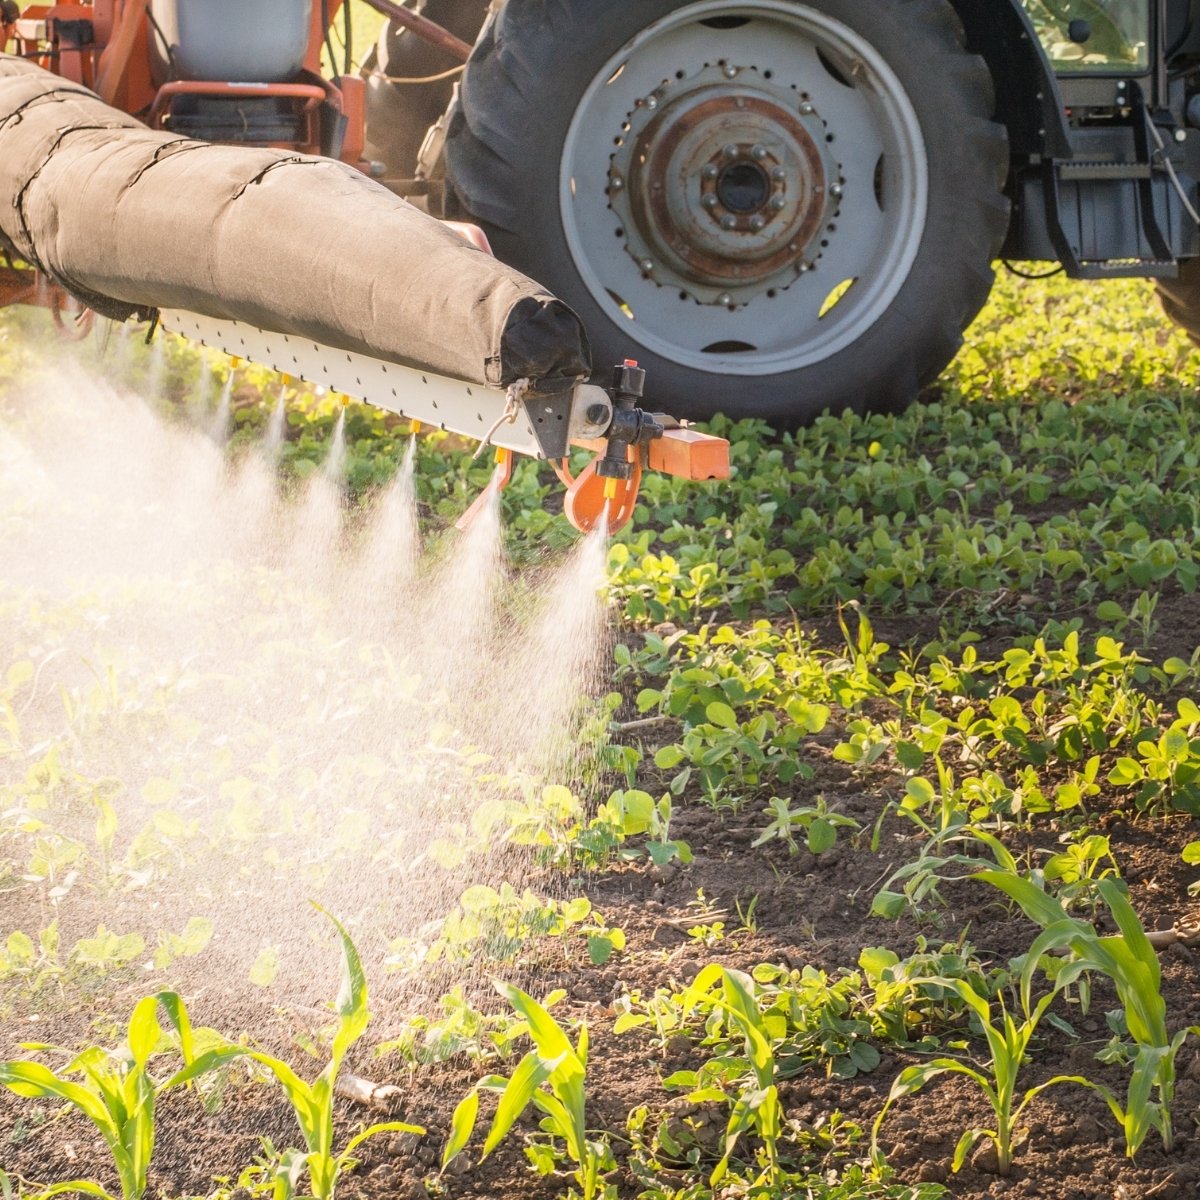 Paraquat being sprayed on a field